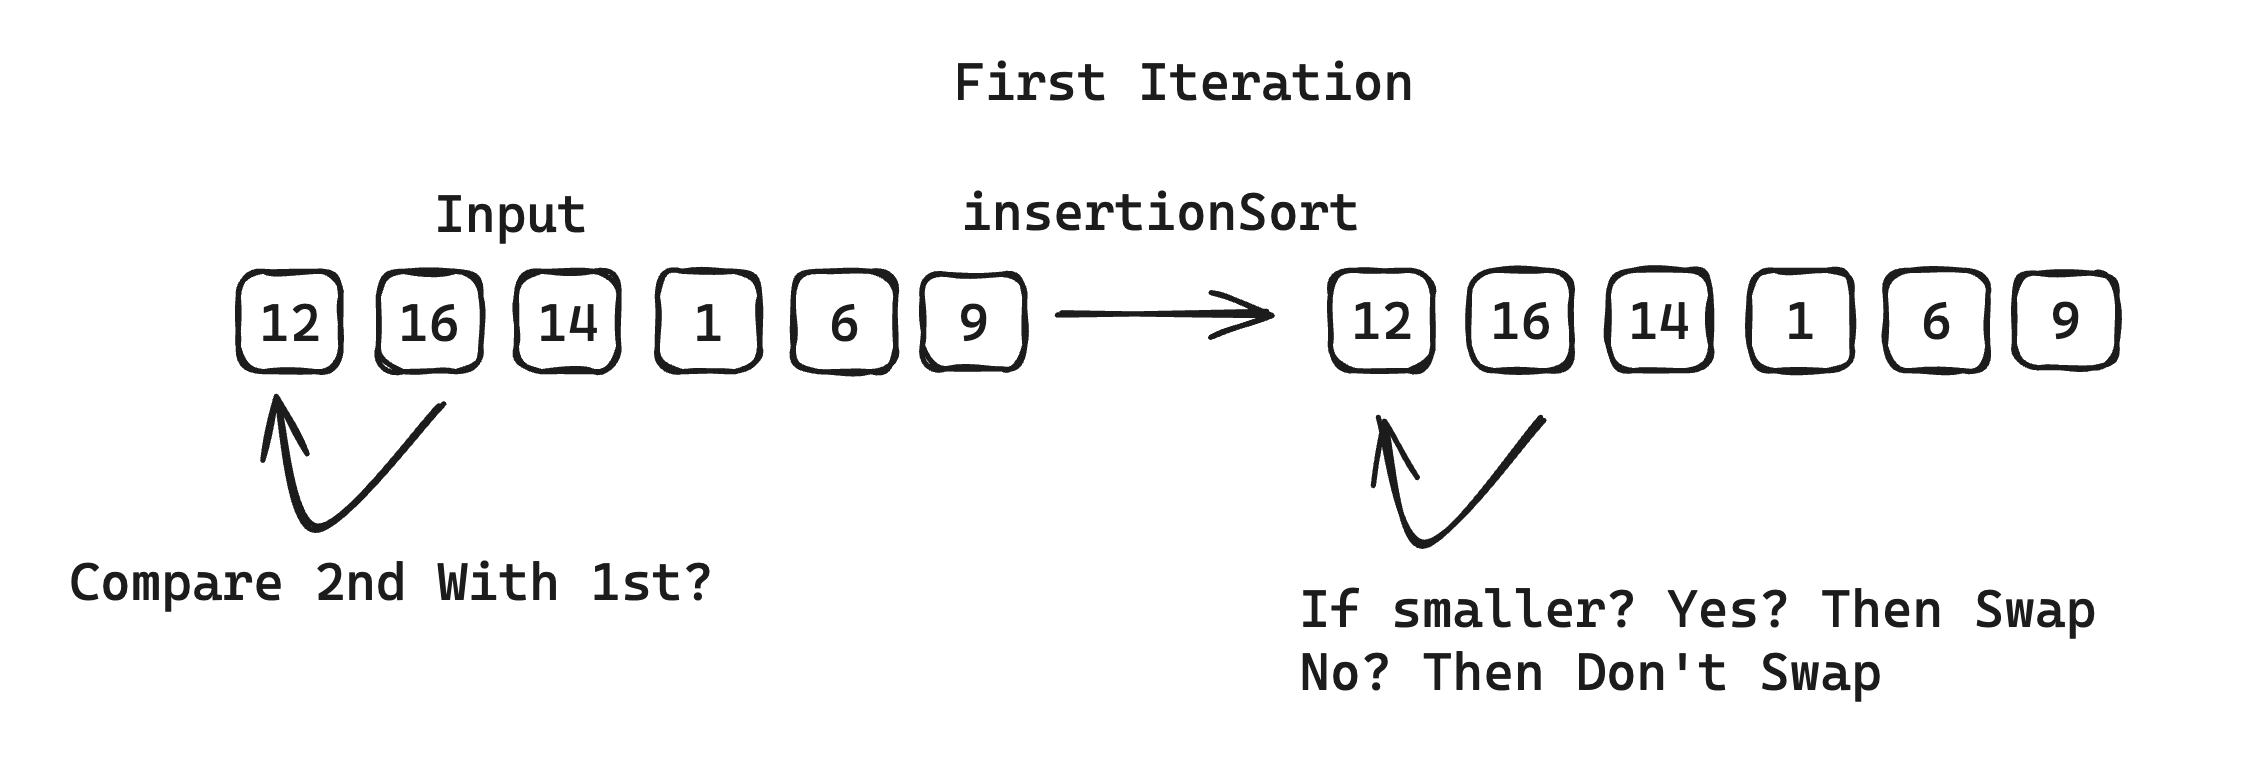 Insertion Sort First Iteration